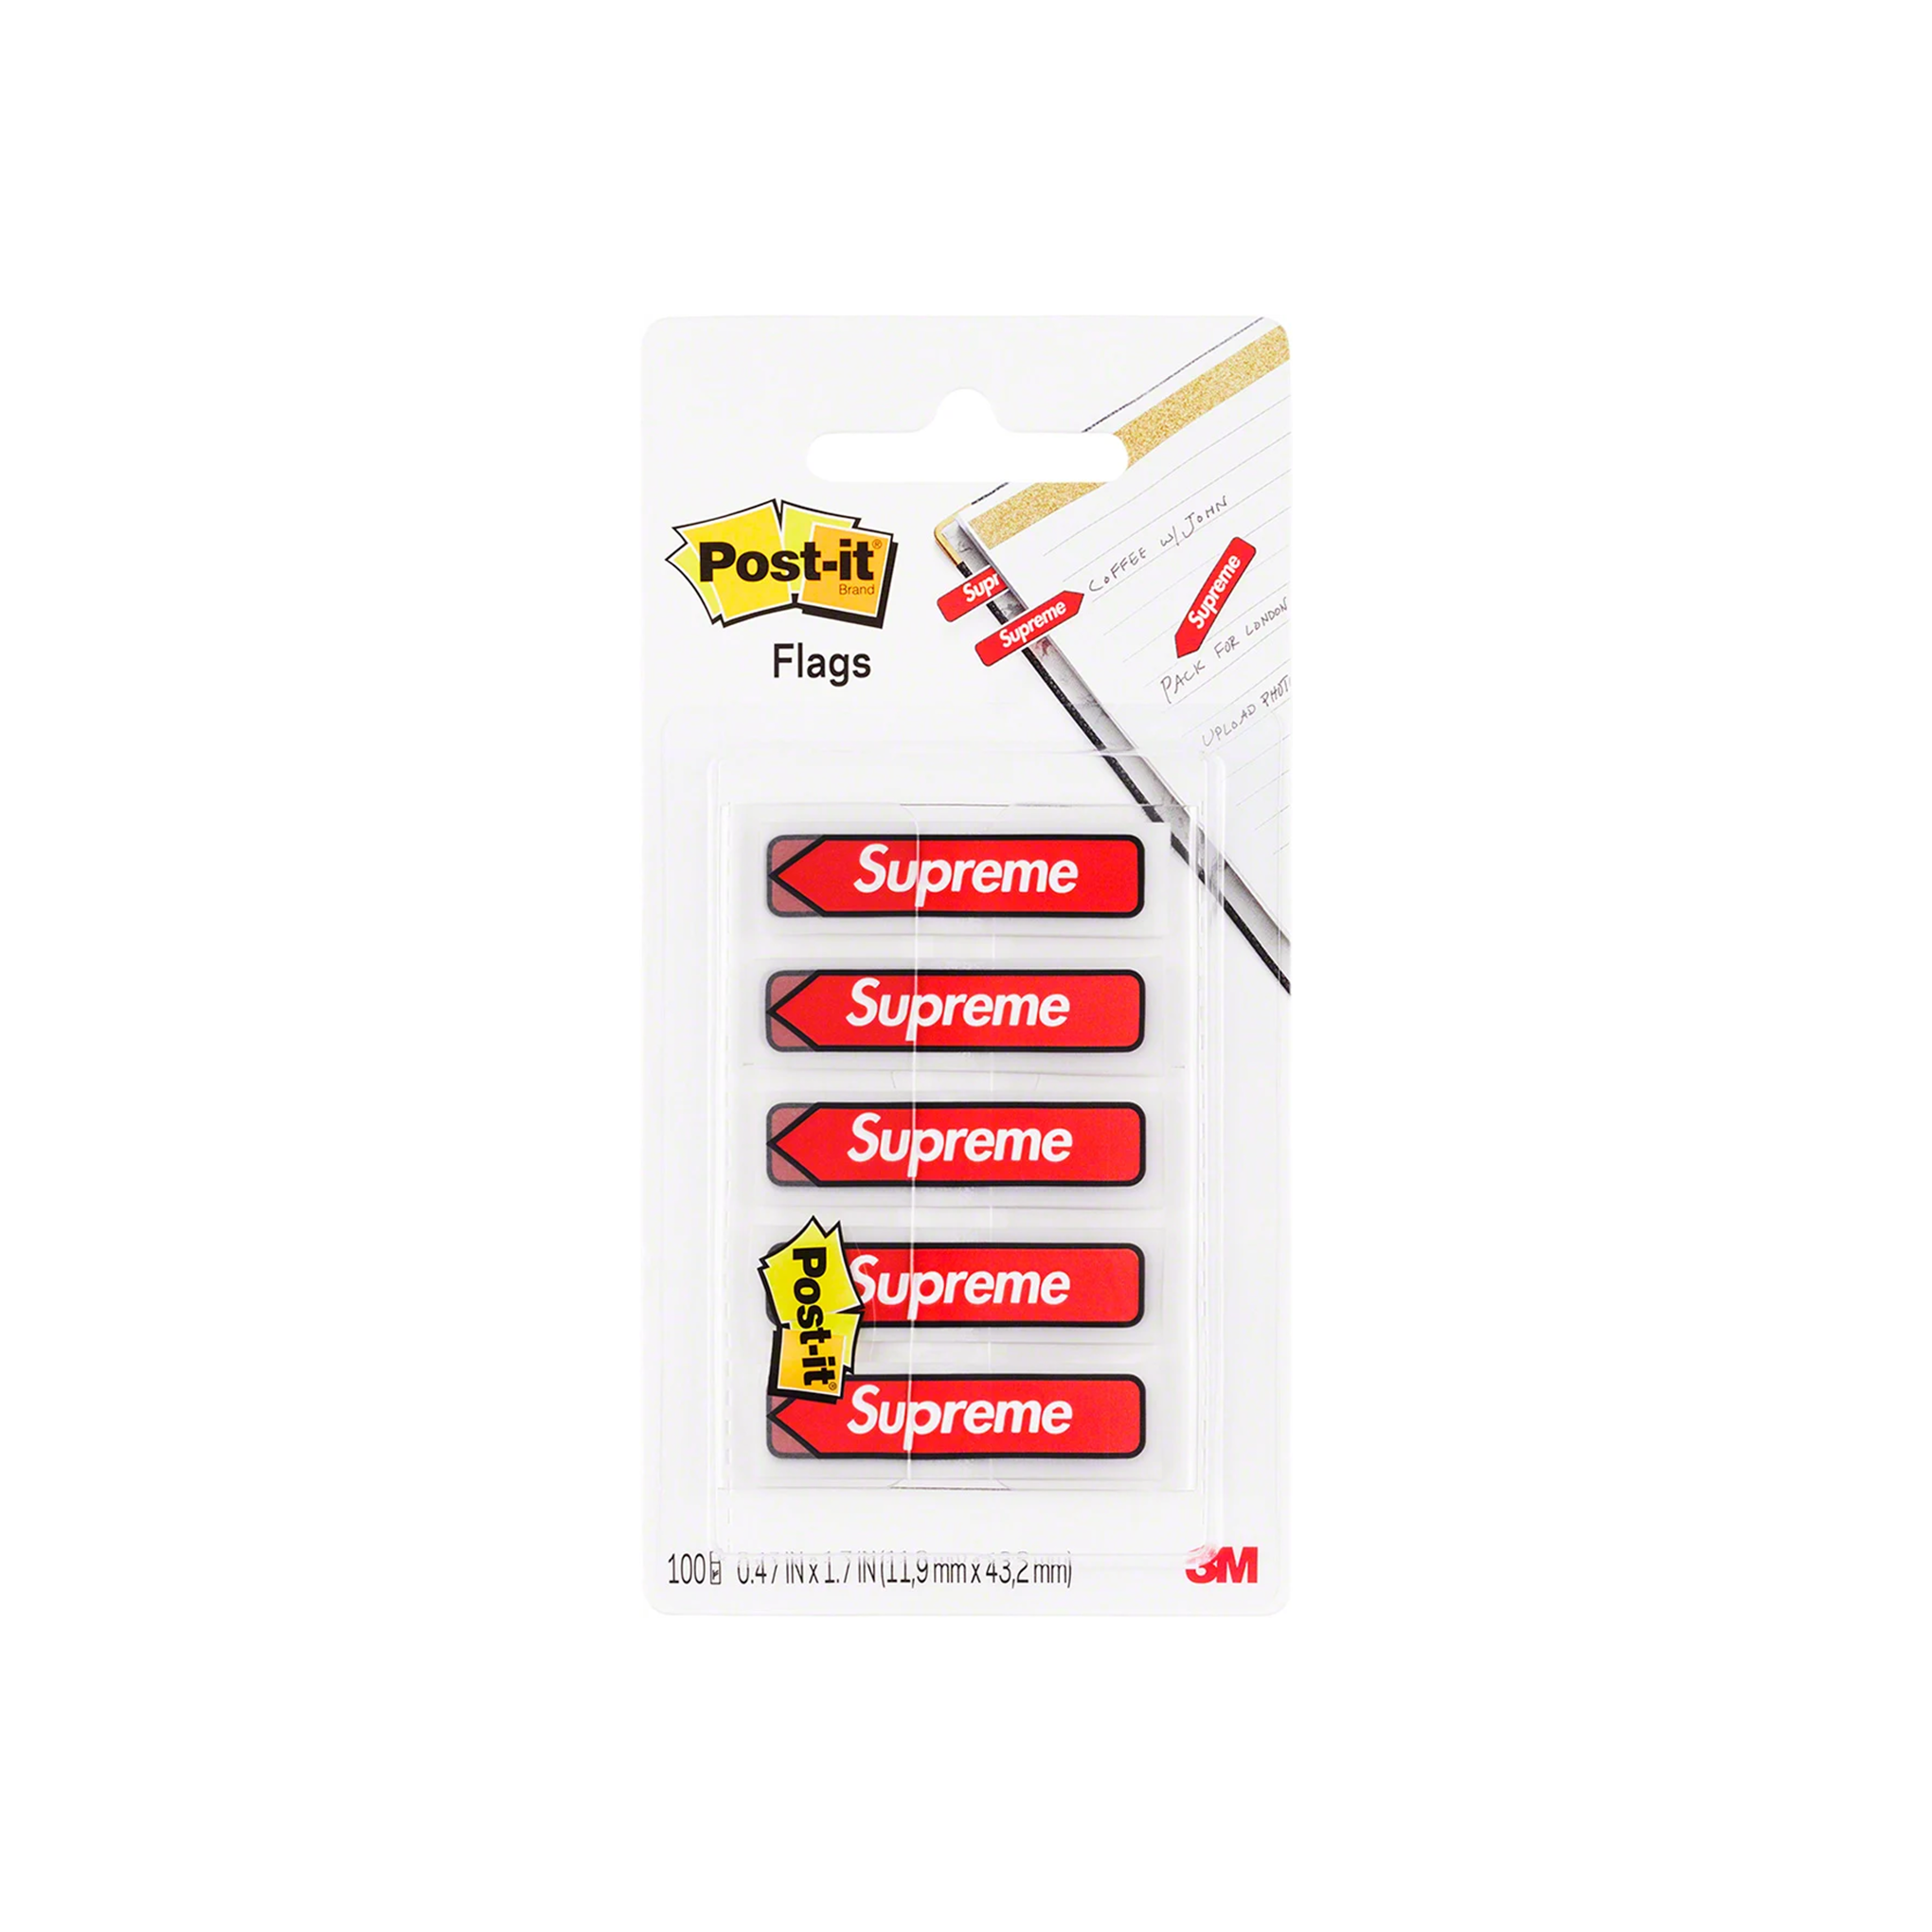 SUPREME POST-IT FLAGS